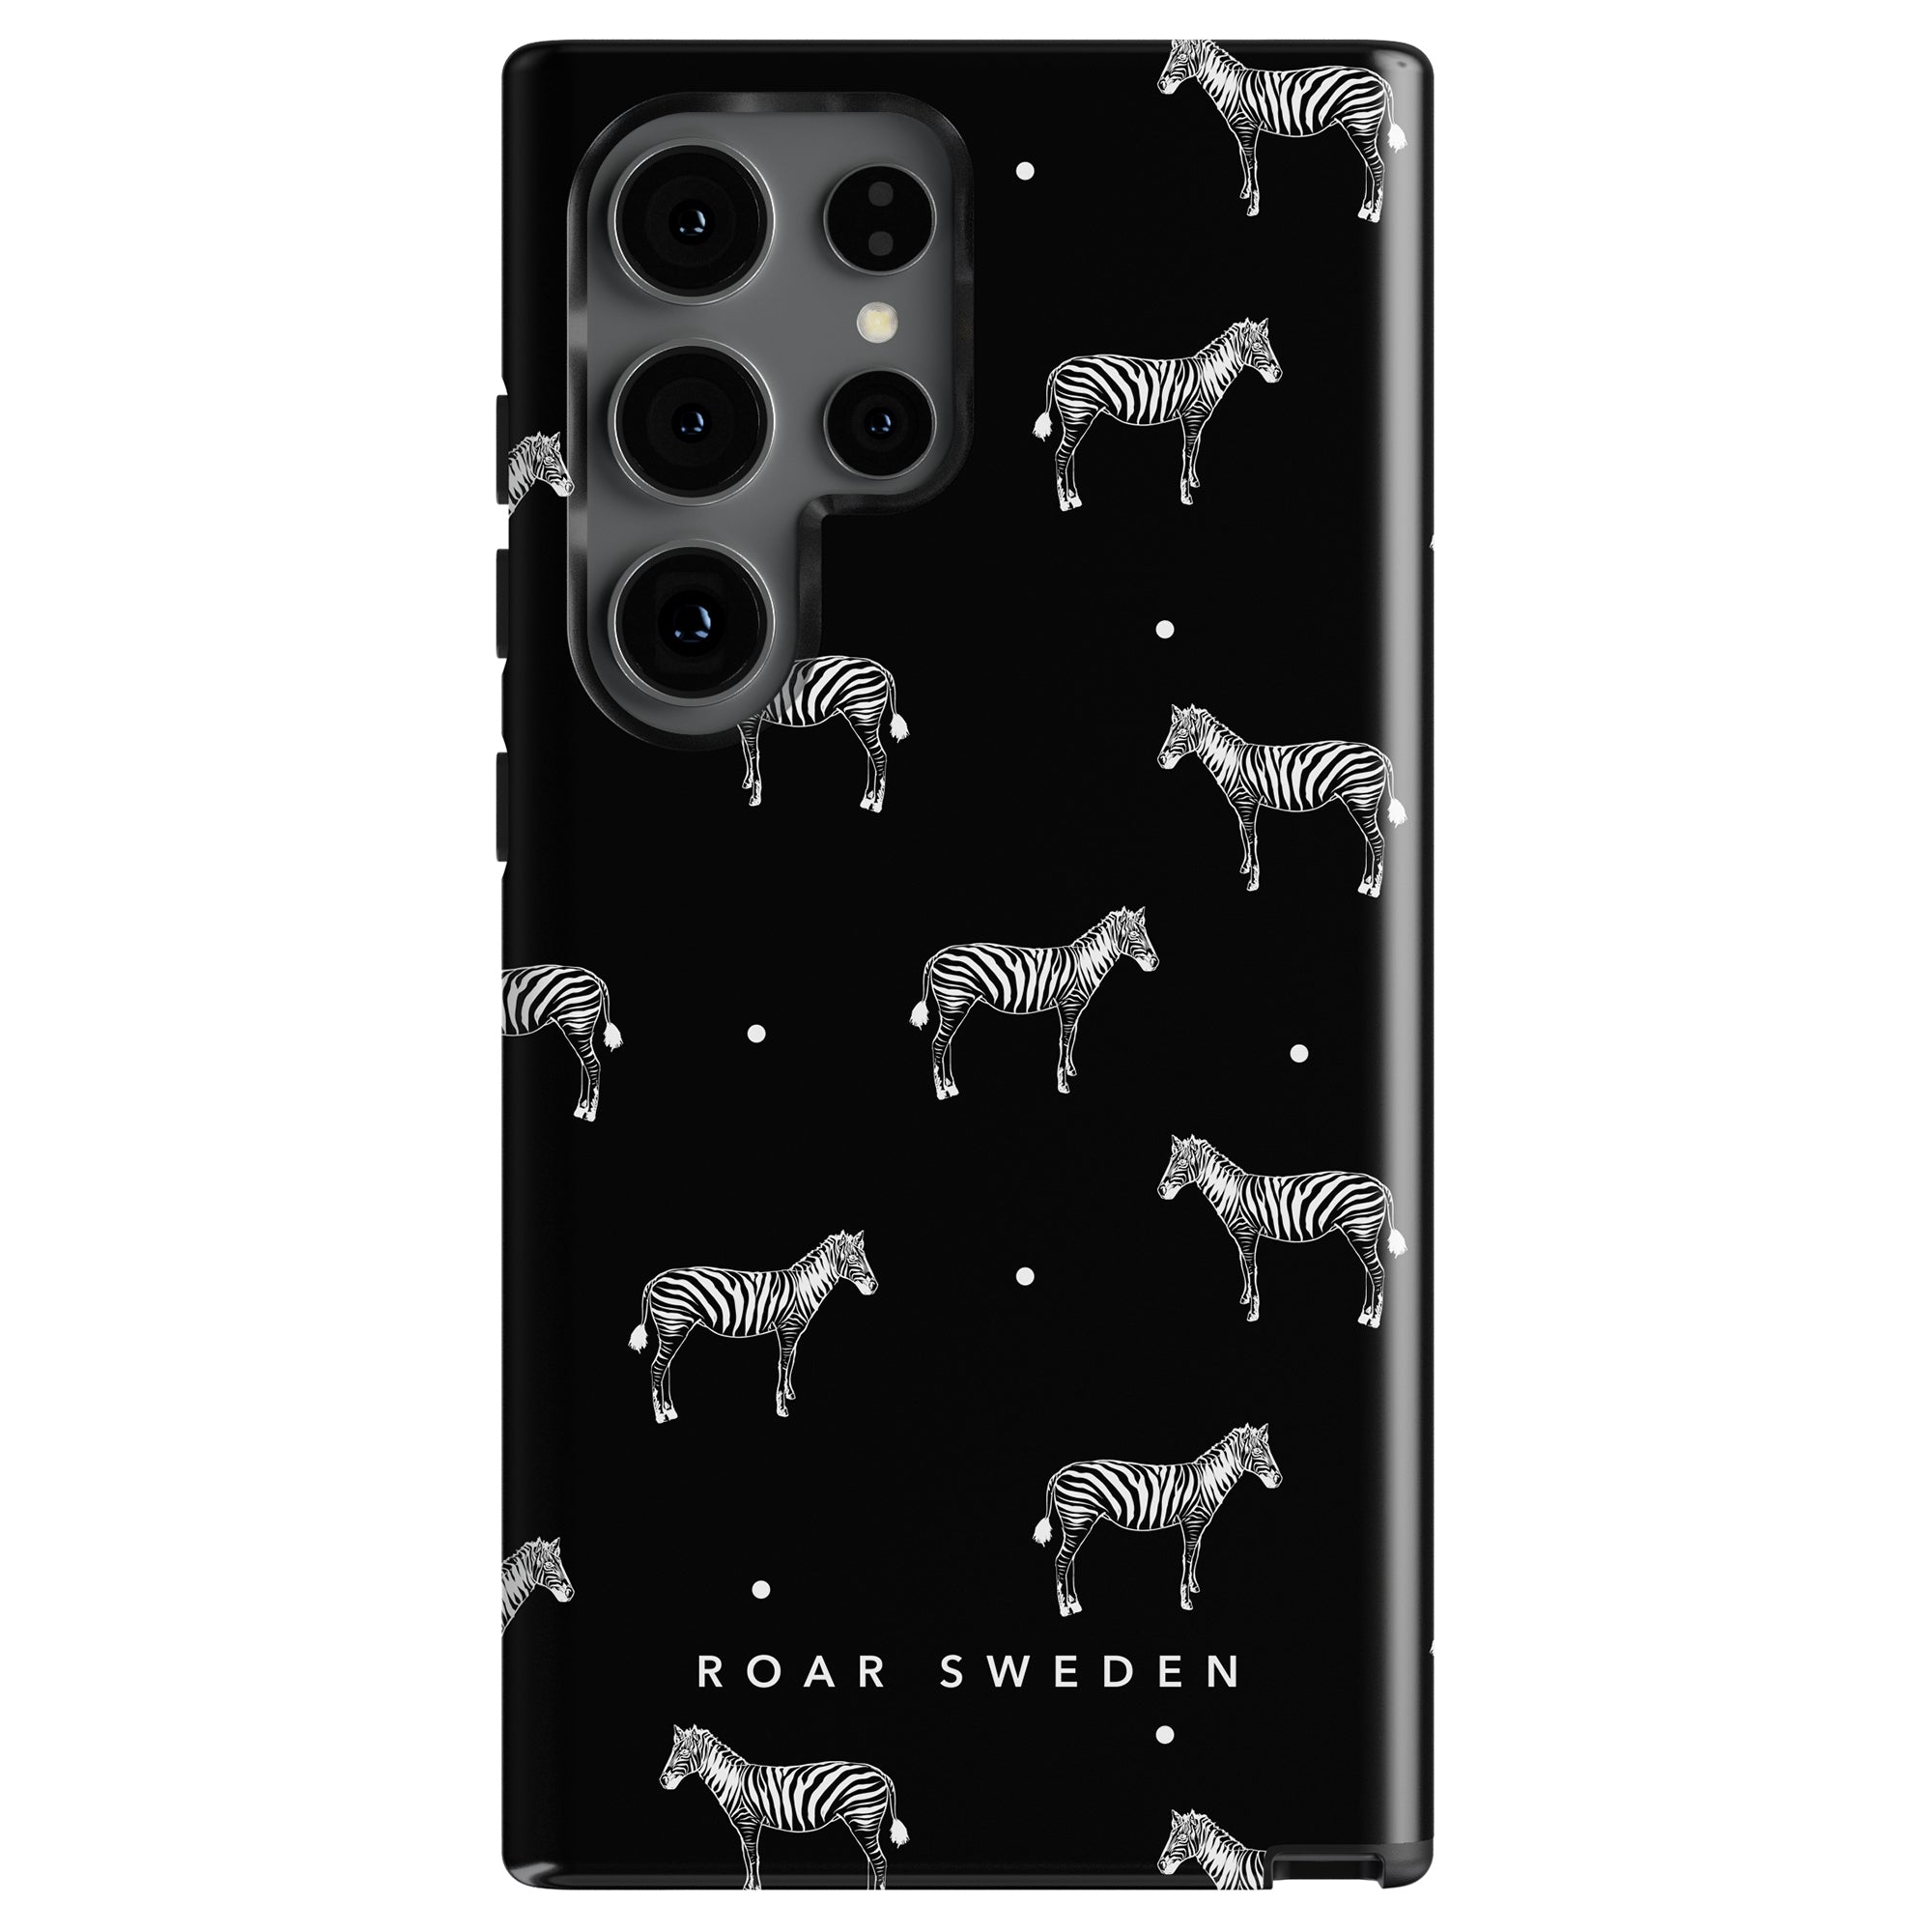 Black phone case with multiple zebra illustrations and small white dots, featuring the text "ROAR SWEDEN" at the bottom. This Dotted Zebra - Tough Case, or mobilskal, offers stylish protection (skydd) for your phone.